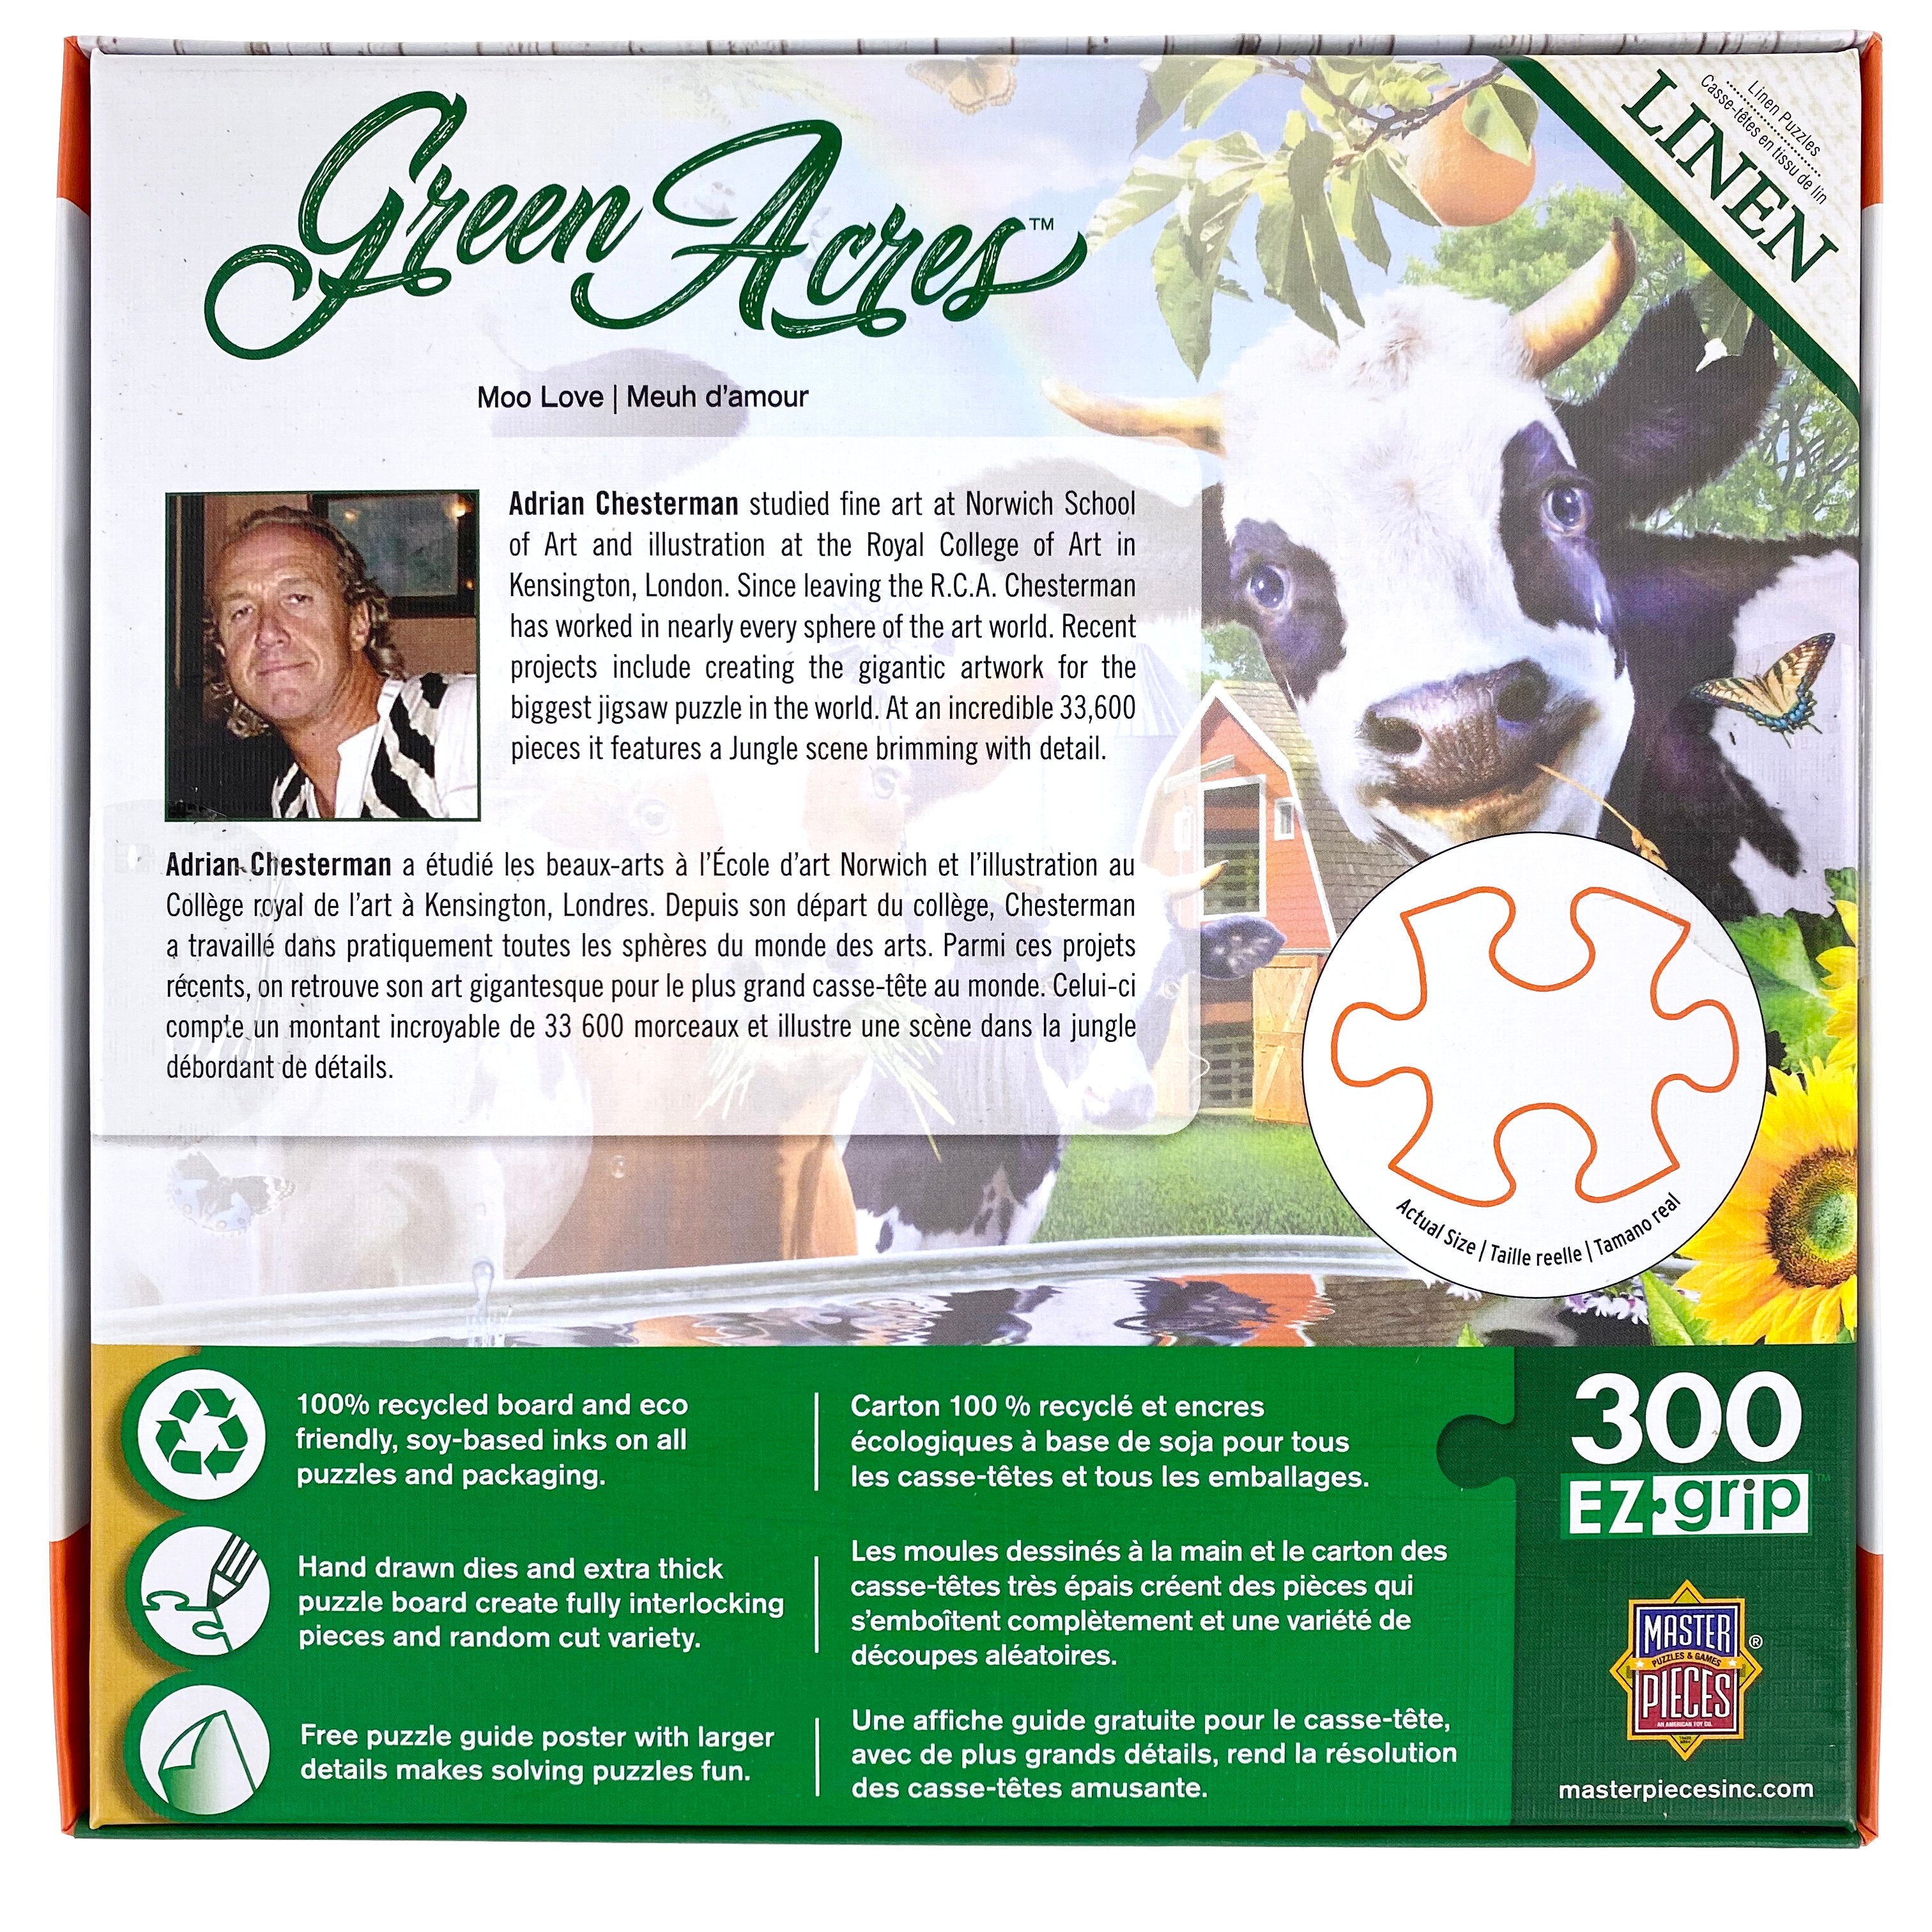 Green Acres - Moo Love Large Format 300 Piece Puzzle    